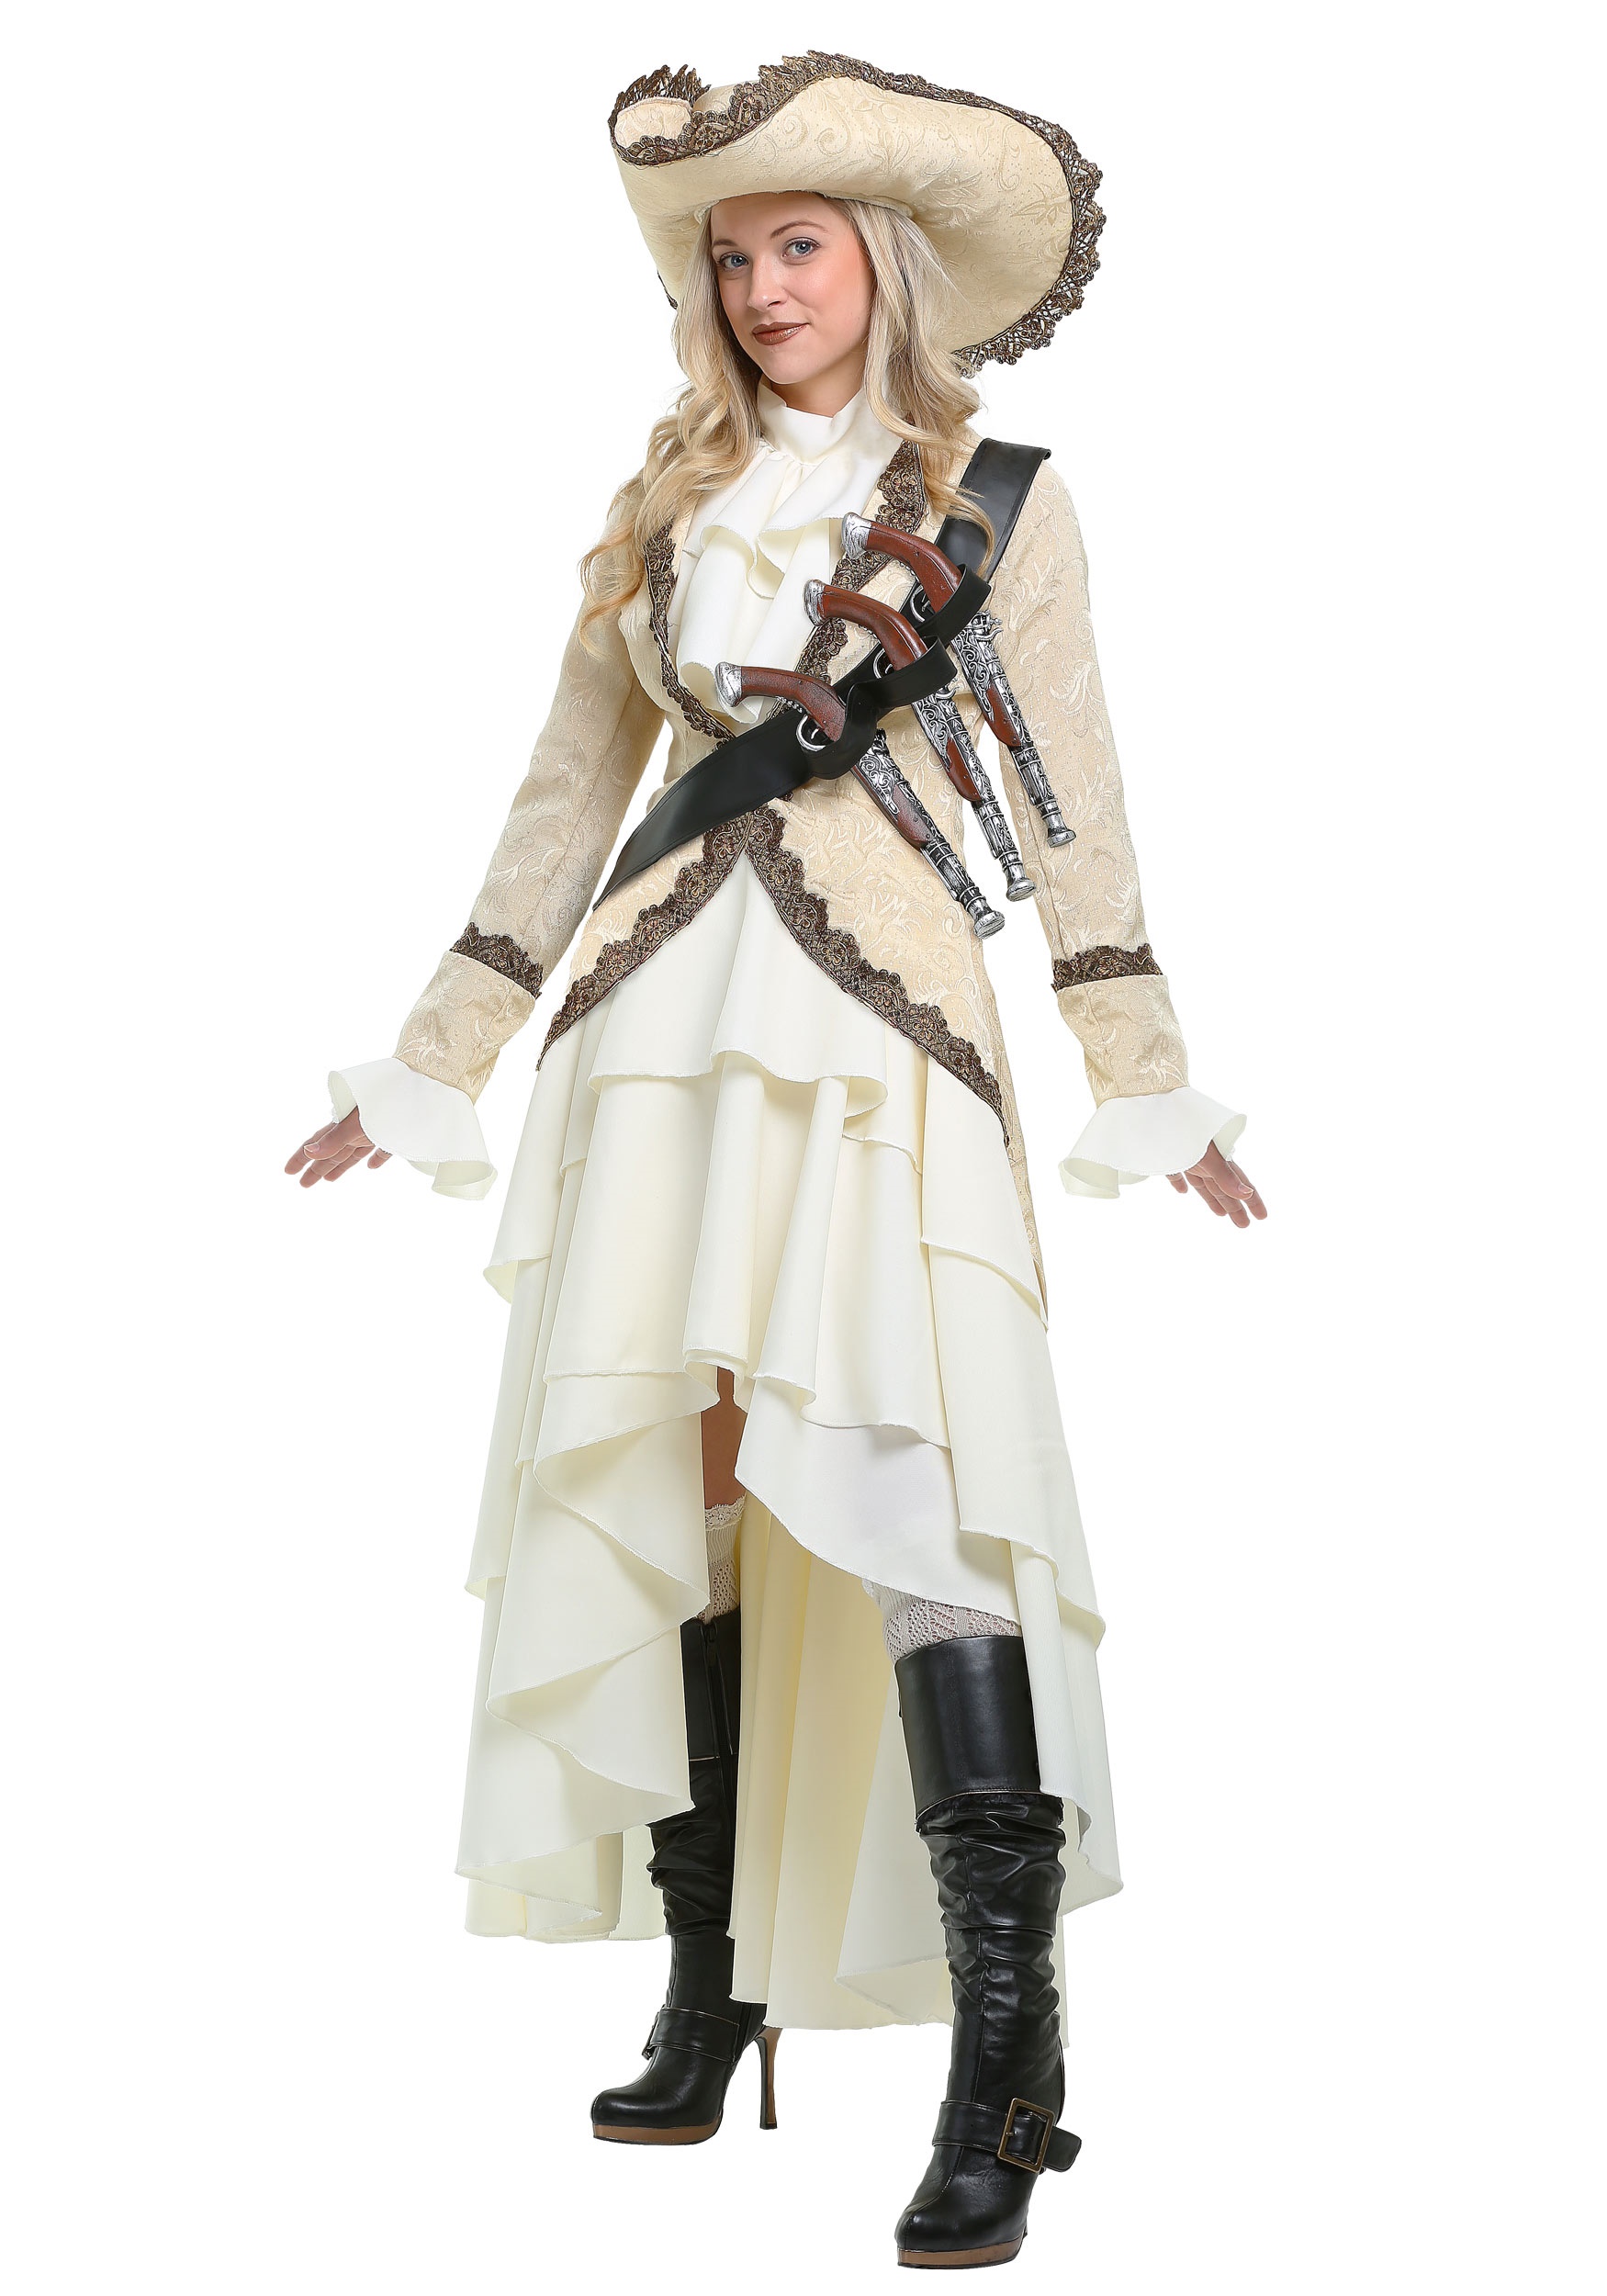 Captivating Pirate Plus Size Costume For Women Pirate Costumes 2961